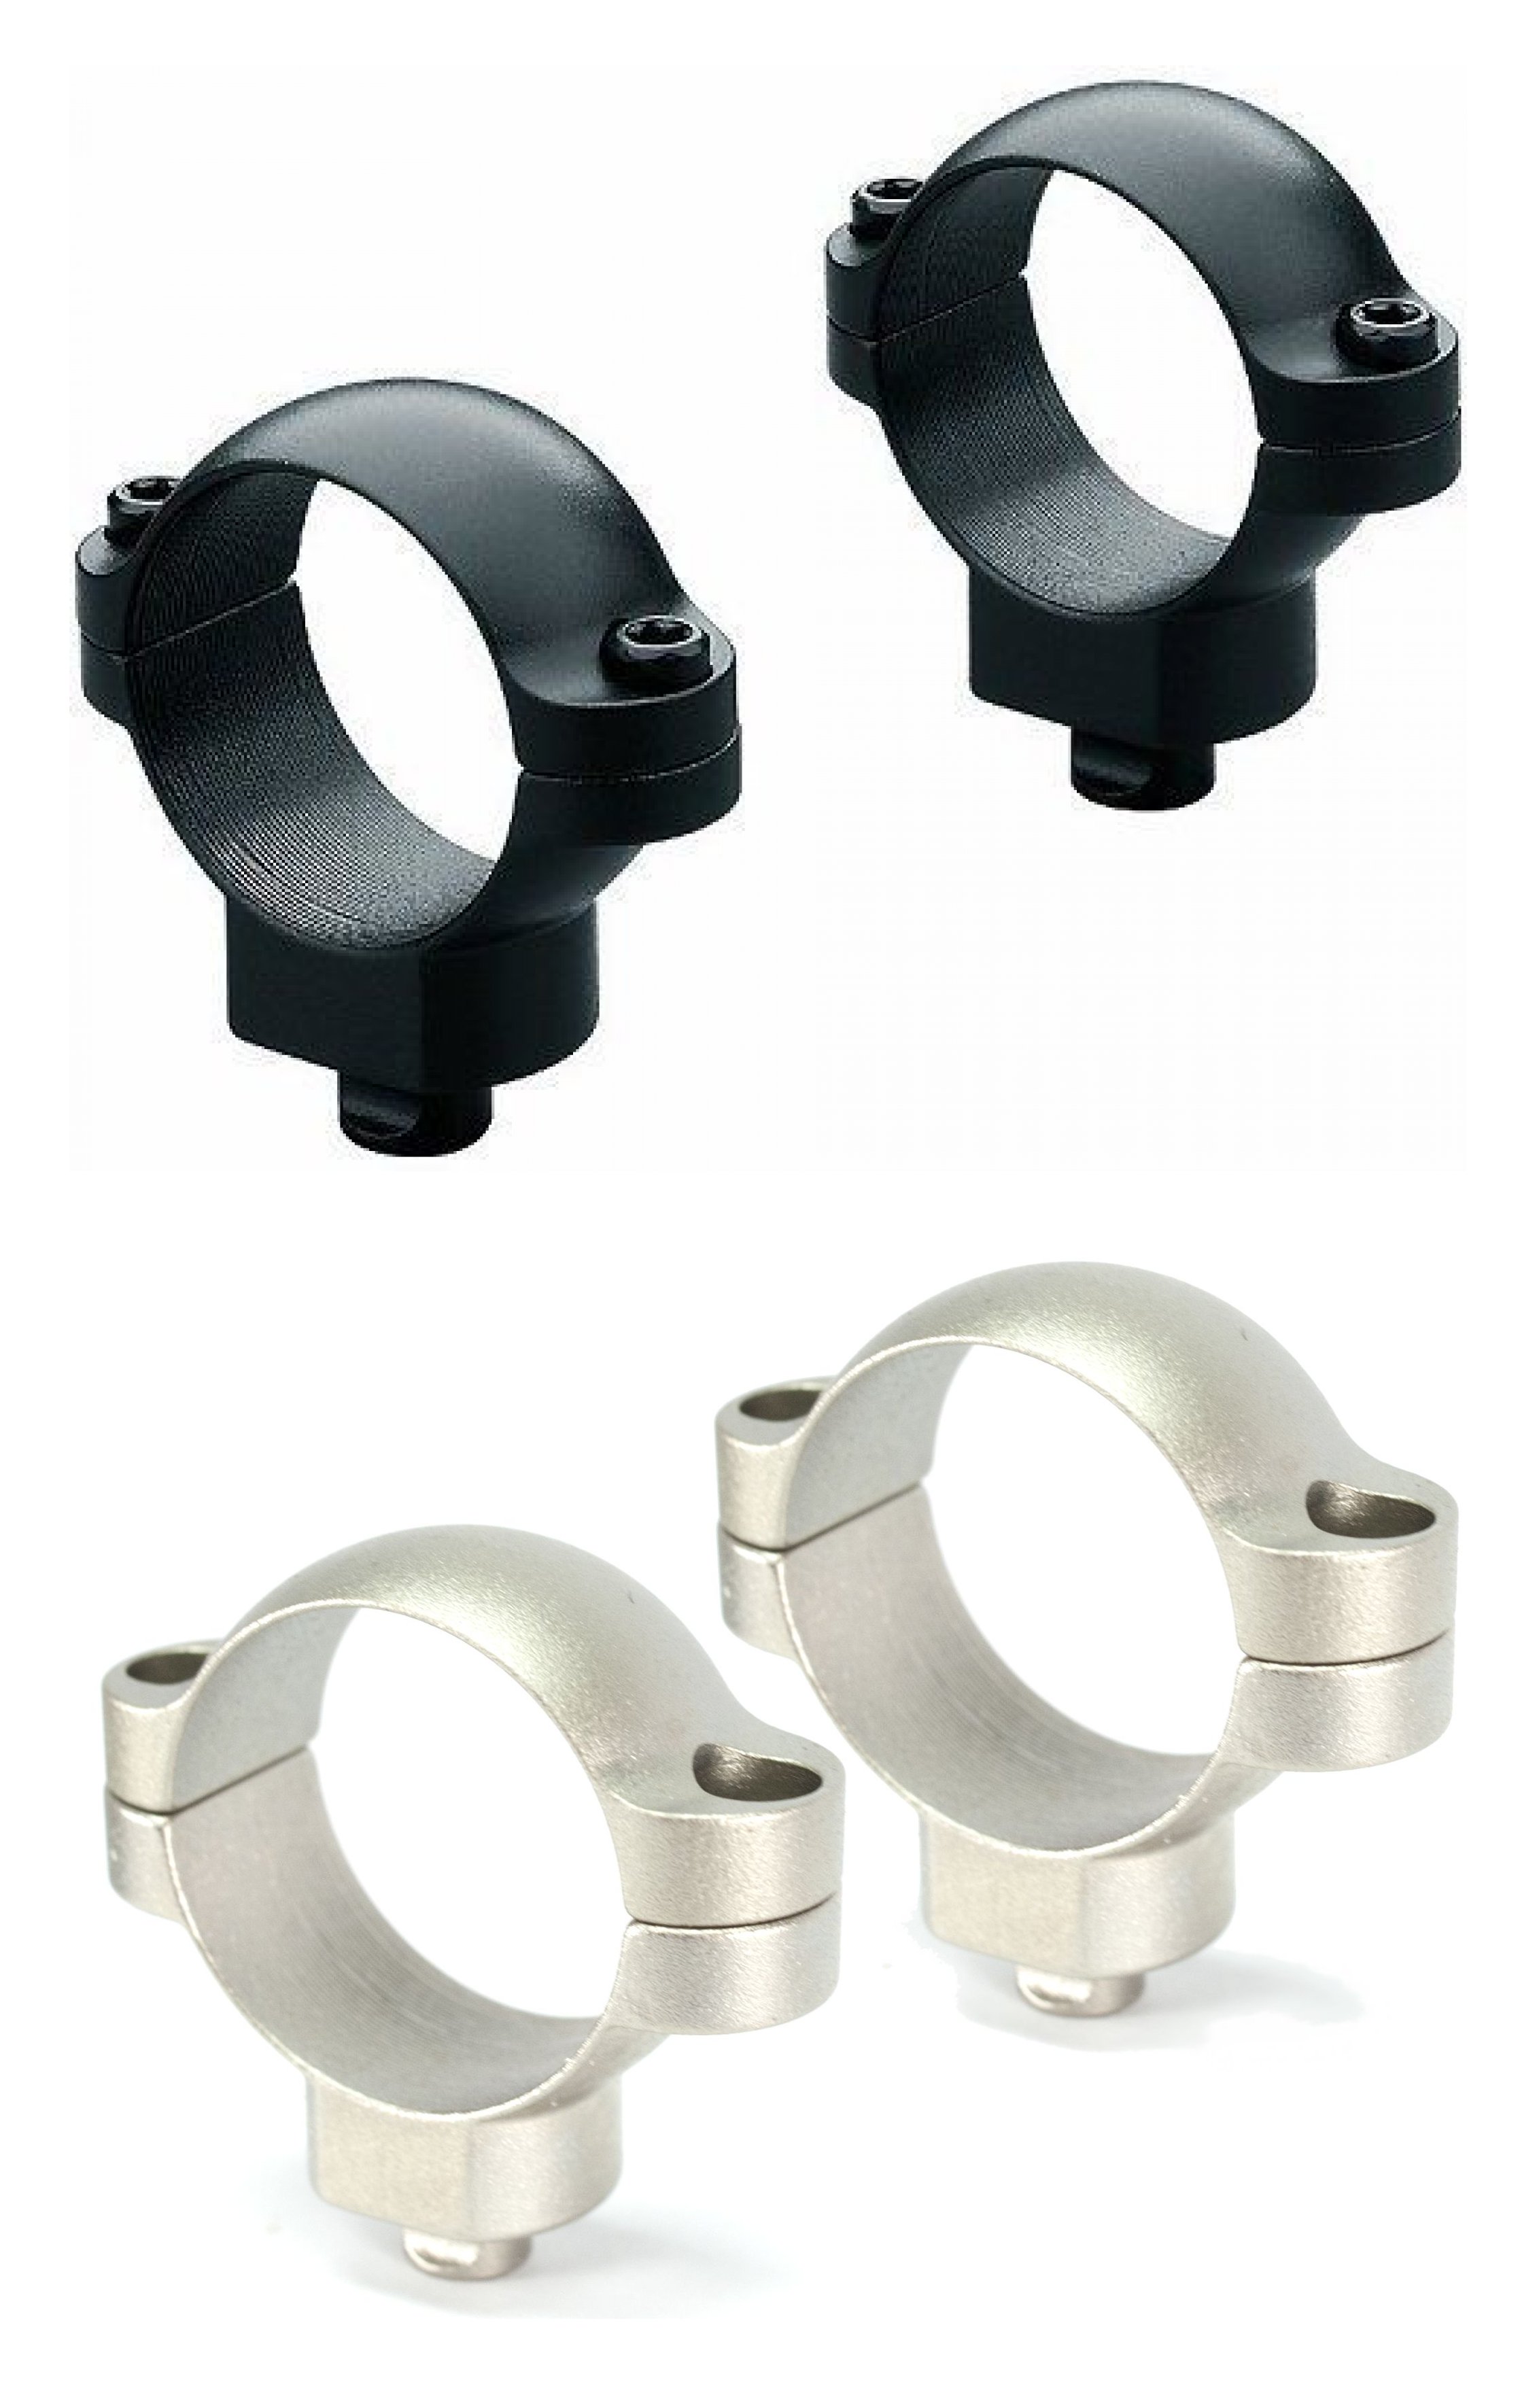 Leupold Quick Release Riflescope Rings Up To 40 Off 4 9 Star Rating Free Shipping Over 49